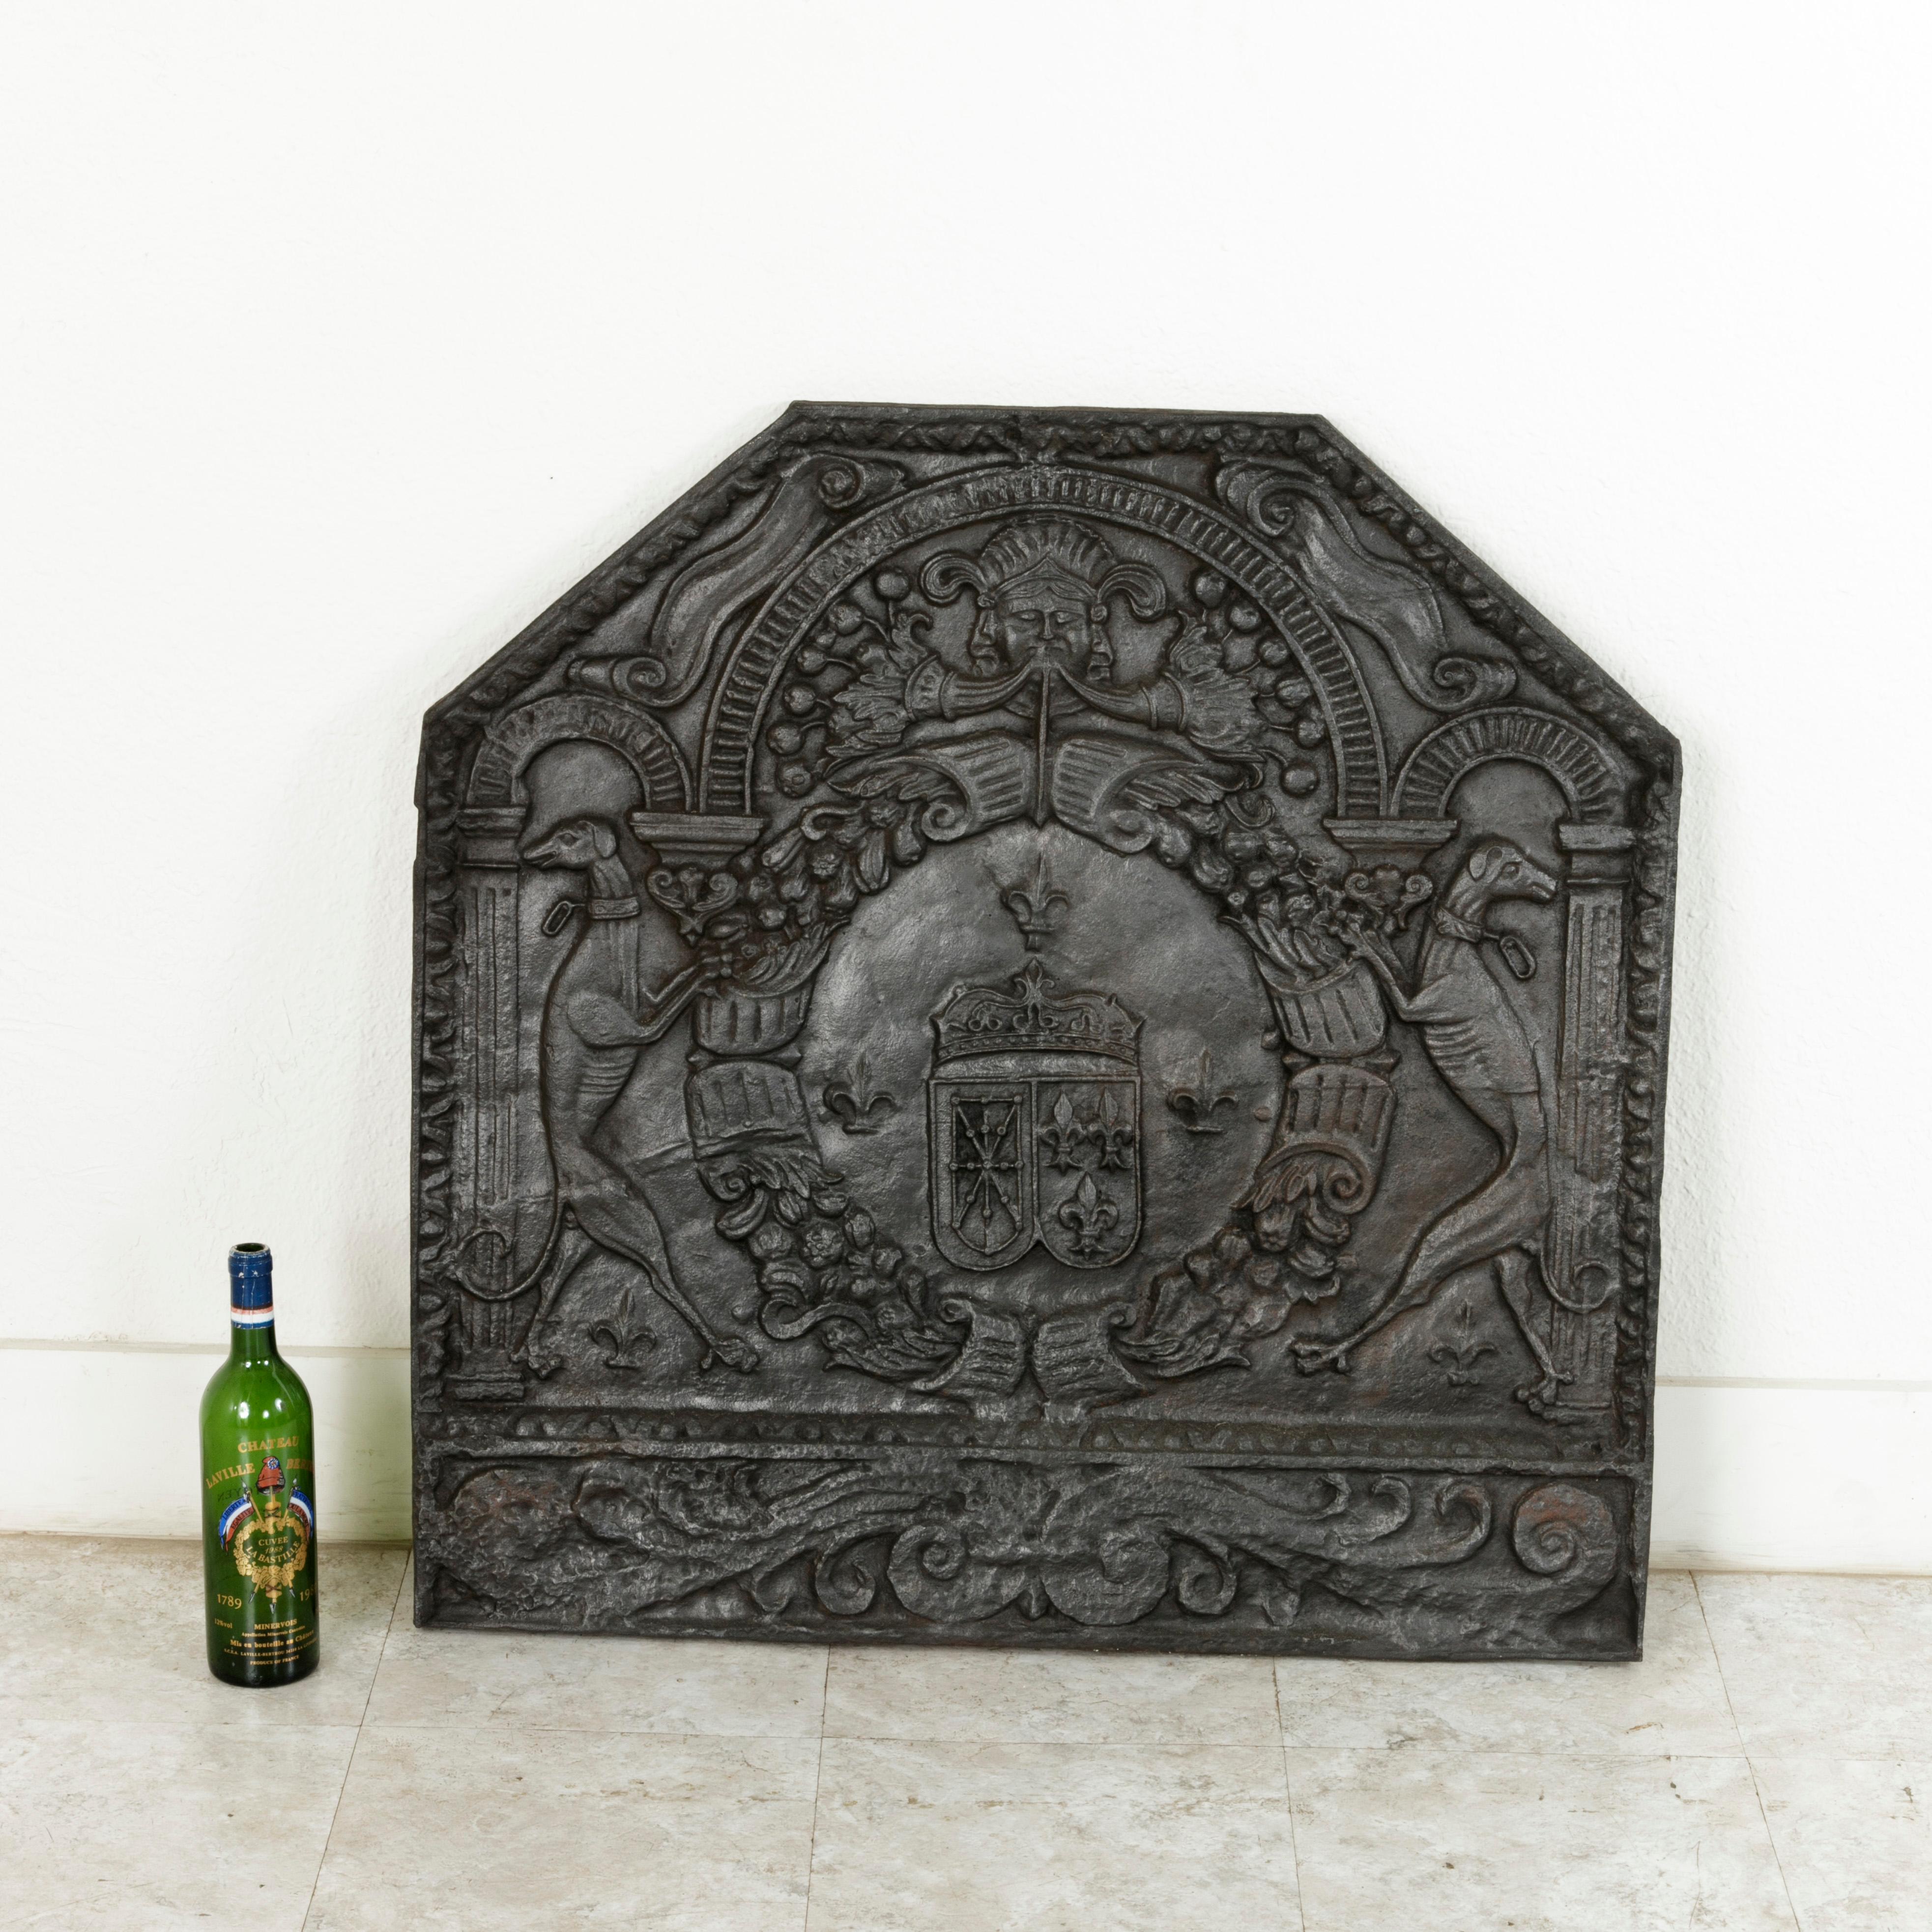 Measuring nearly 34 inches square, this very large mid-18th century French Louis XV period iron fireplace back features a heraldic motif with the coats of arms of France and Navarre side by side in the centre with a crown above. A symbol of the